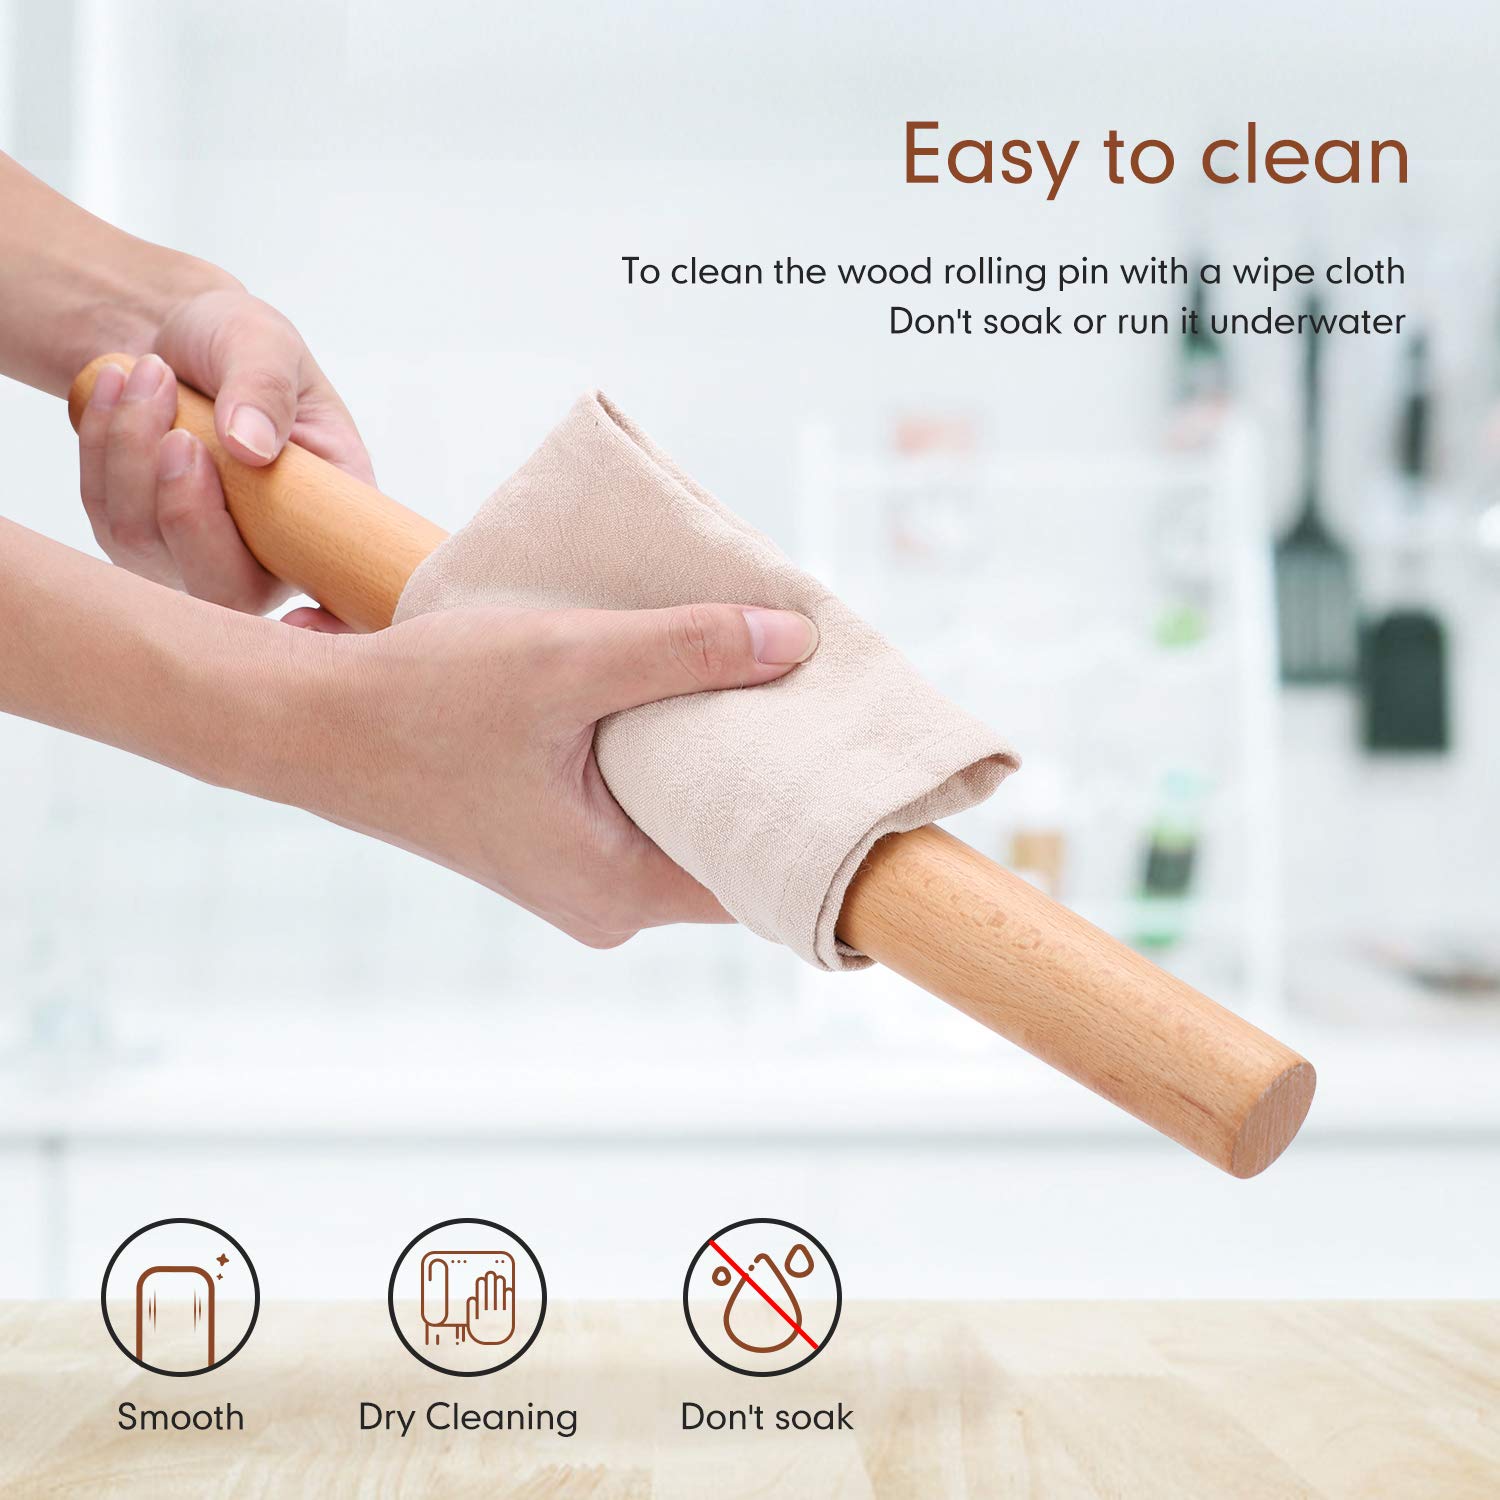 Wood French Rolling Pin for Baking, QUELLANCE Wooden Dough Roller with Silicone Baking Mat, Beech Wood Rolling Pins for Baking Dough, Pizza, Pie, Pastries, Pasta and Cookies,Red Pastry Mat